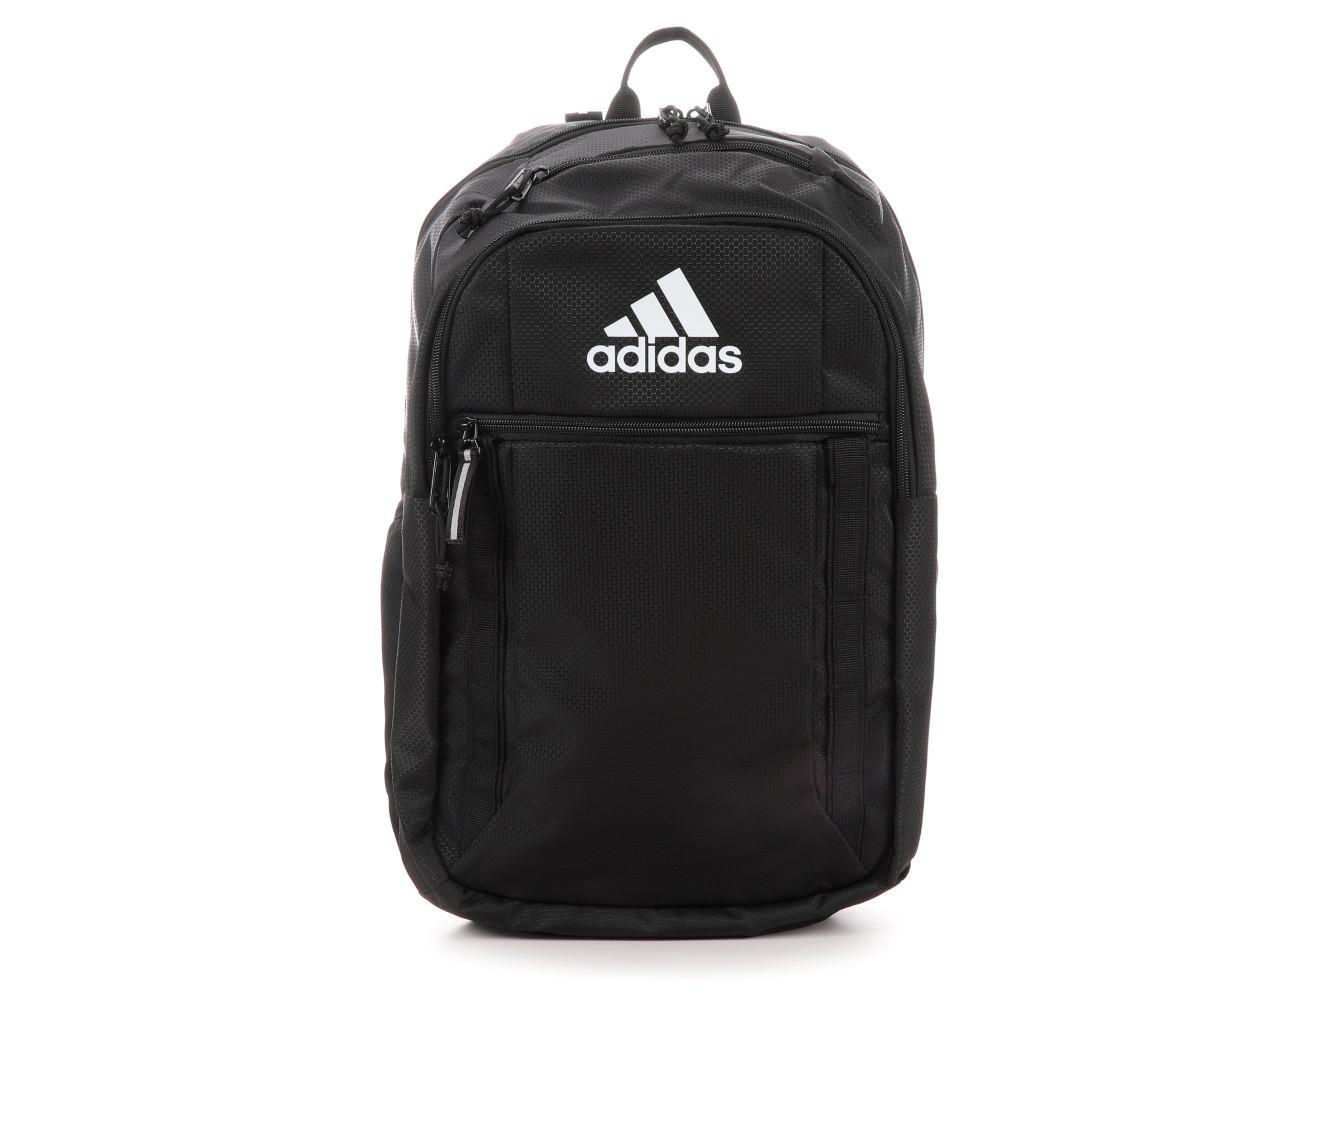 Adidas Excel 7 Backpack